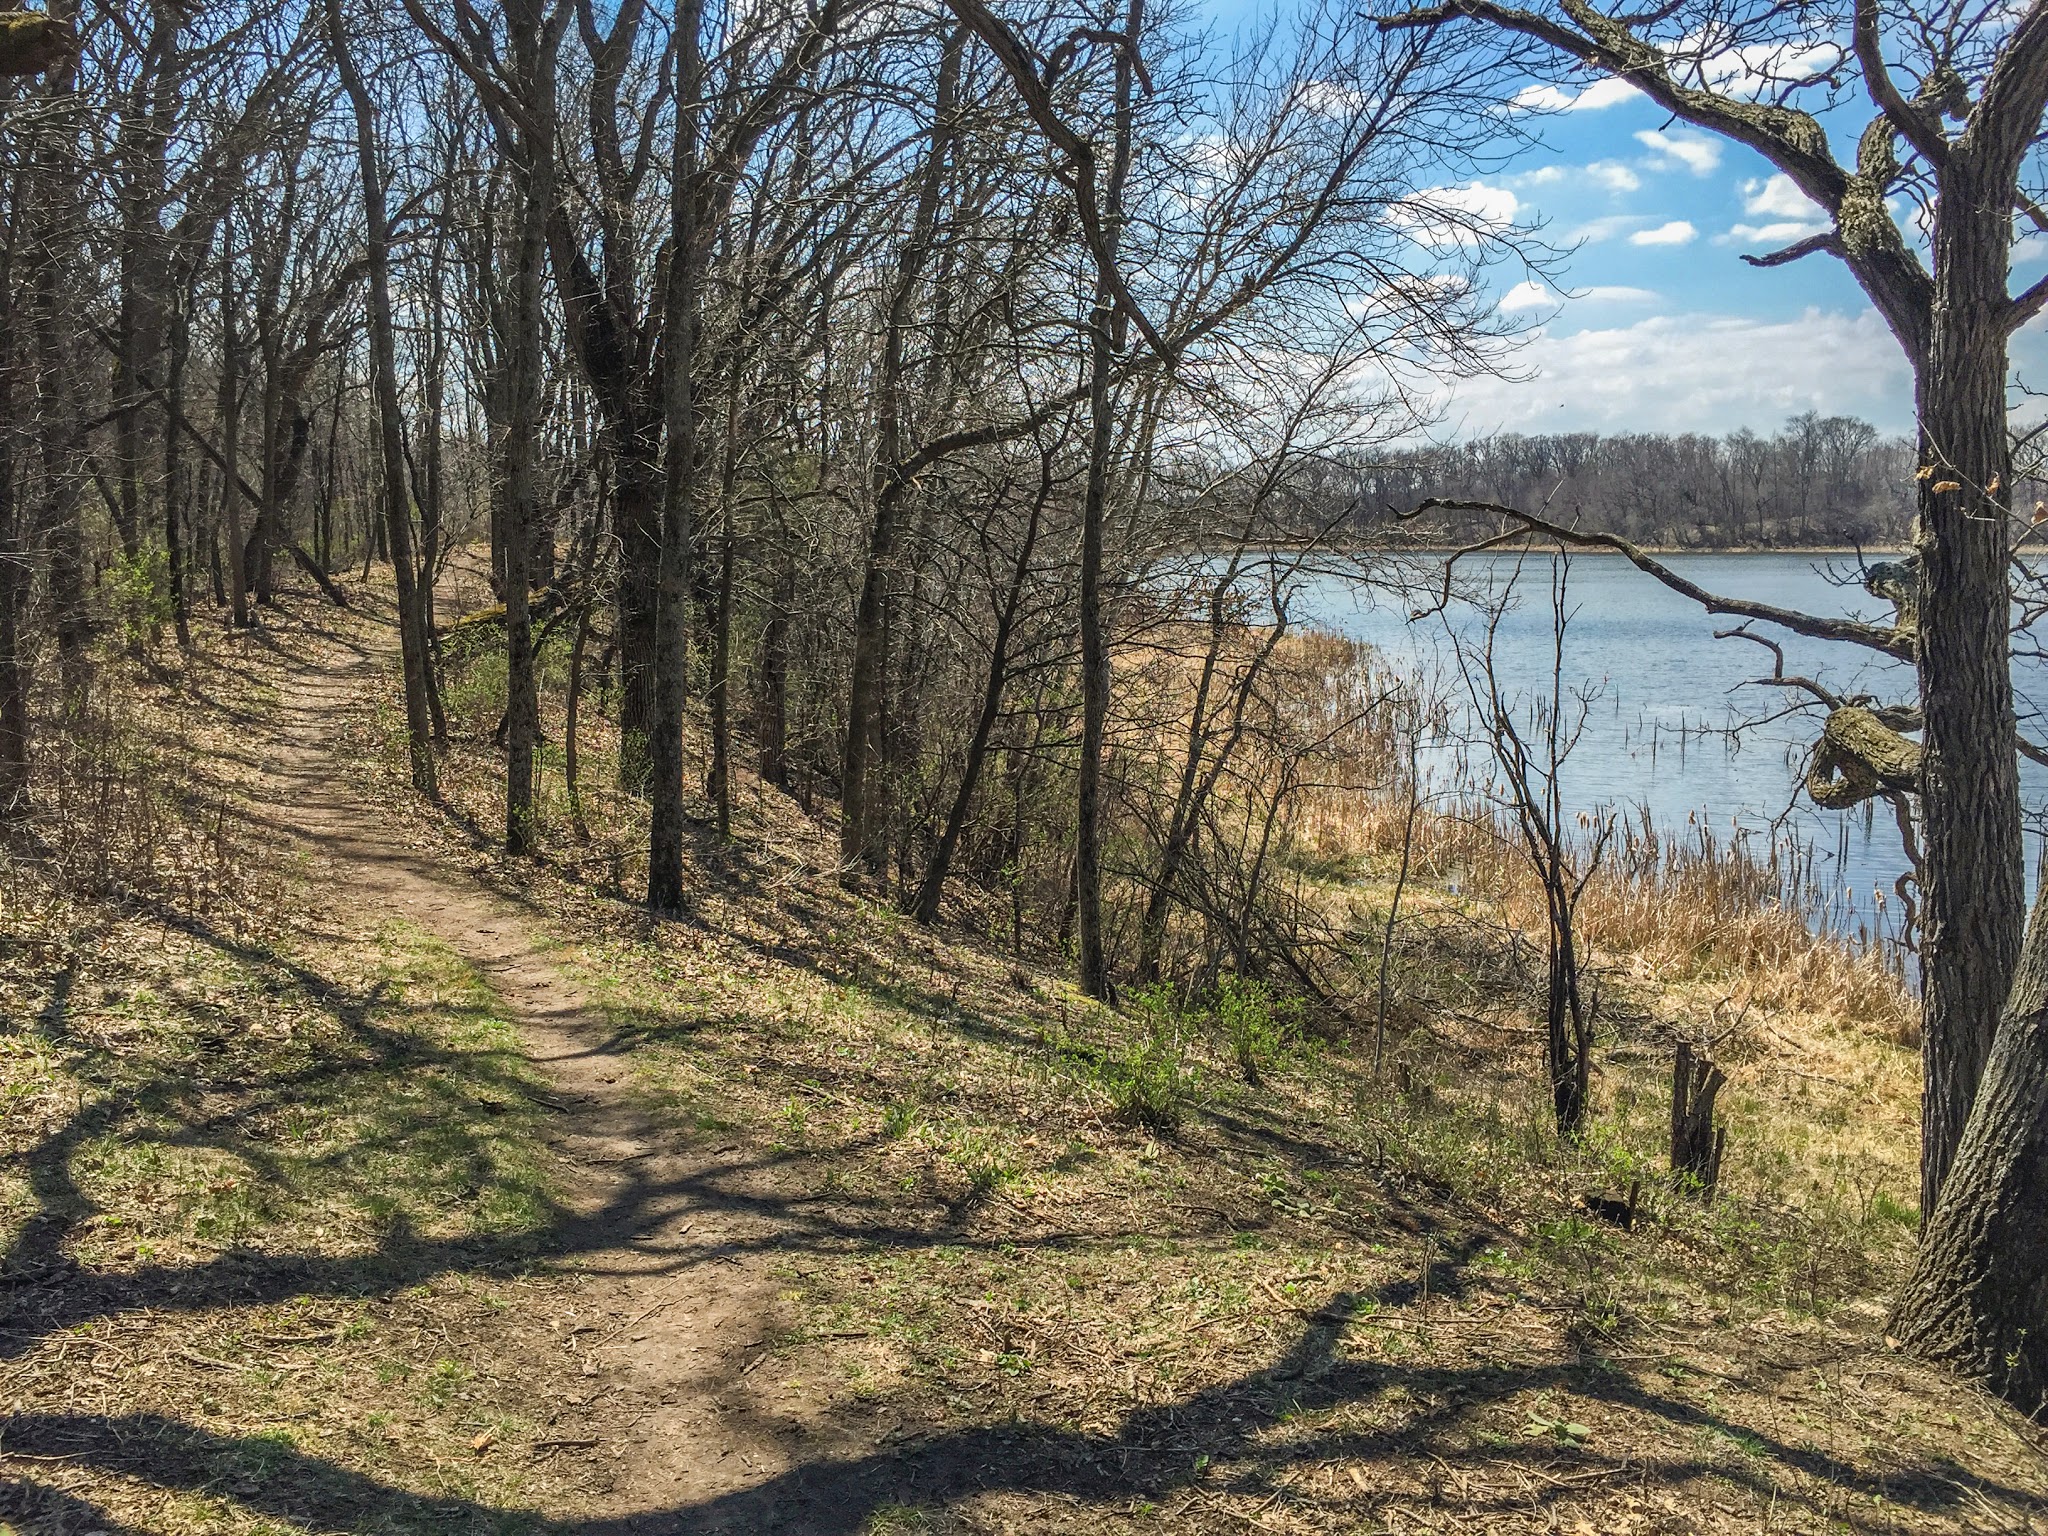 Along the Storrs Lake Segment of the Ice Age Trail